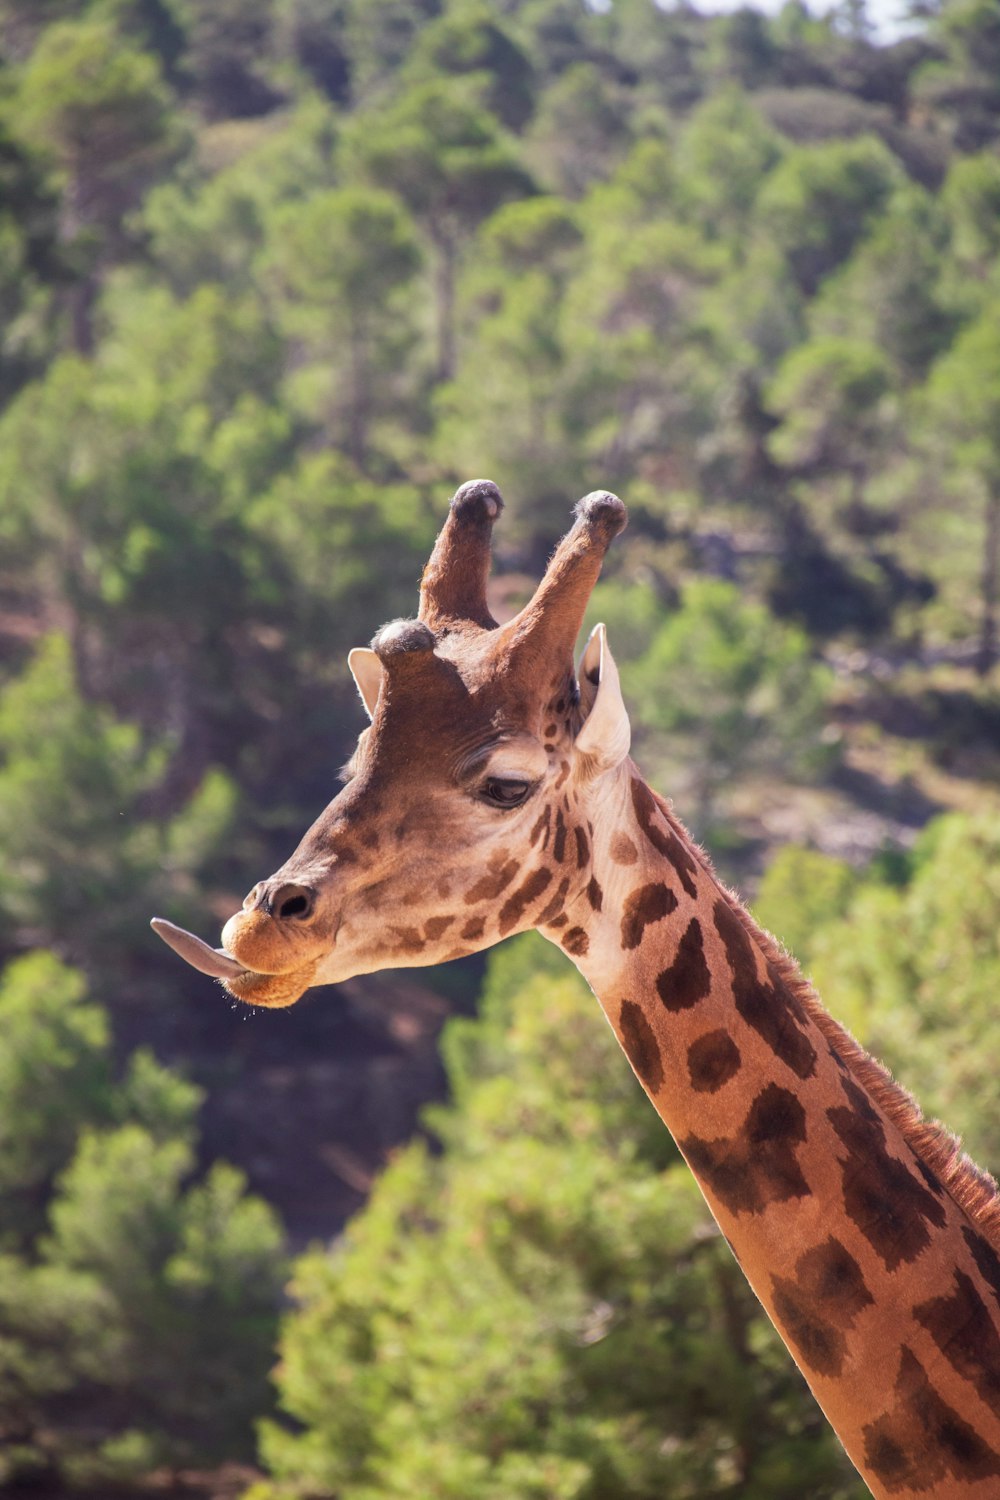 brown giraffe in close up photography during daytime